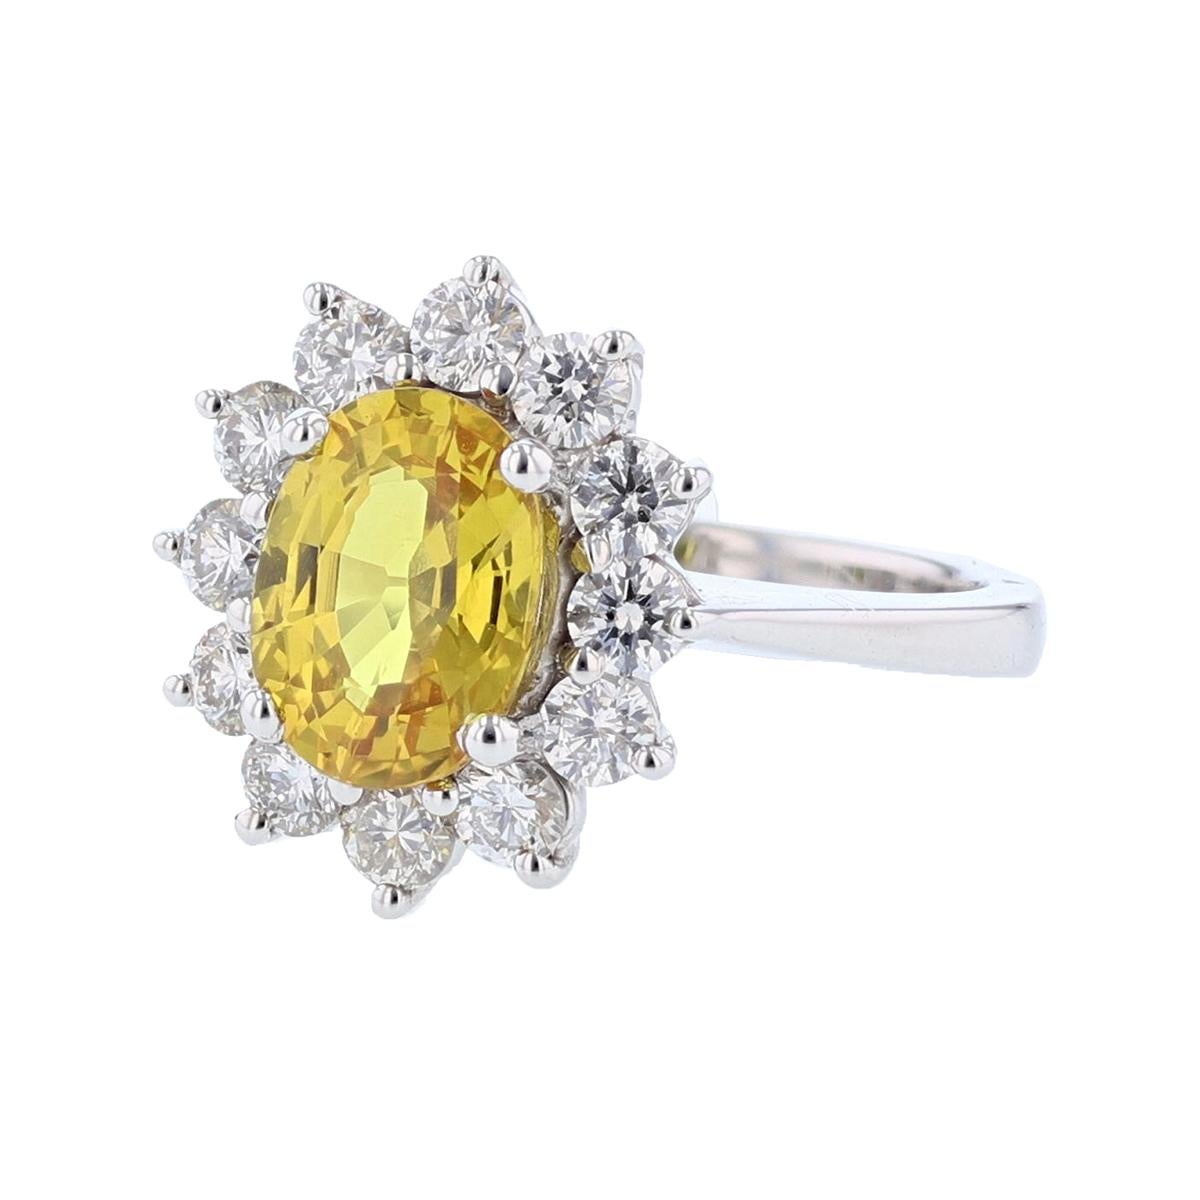 This ring is set in 14 karat white gold. The center stone is a Oval Yellow Sapphire weighing 2.49 carats and is prong set. The mounting features 12 round cut , prong set diamonds weighing 0.88cts.